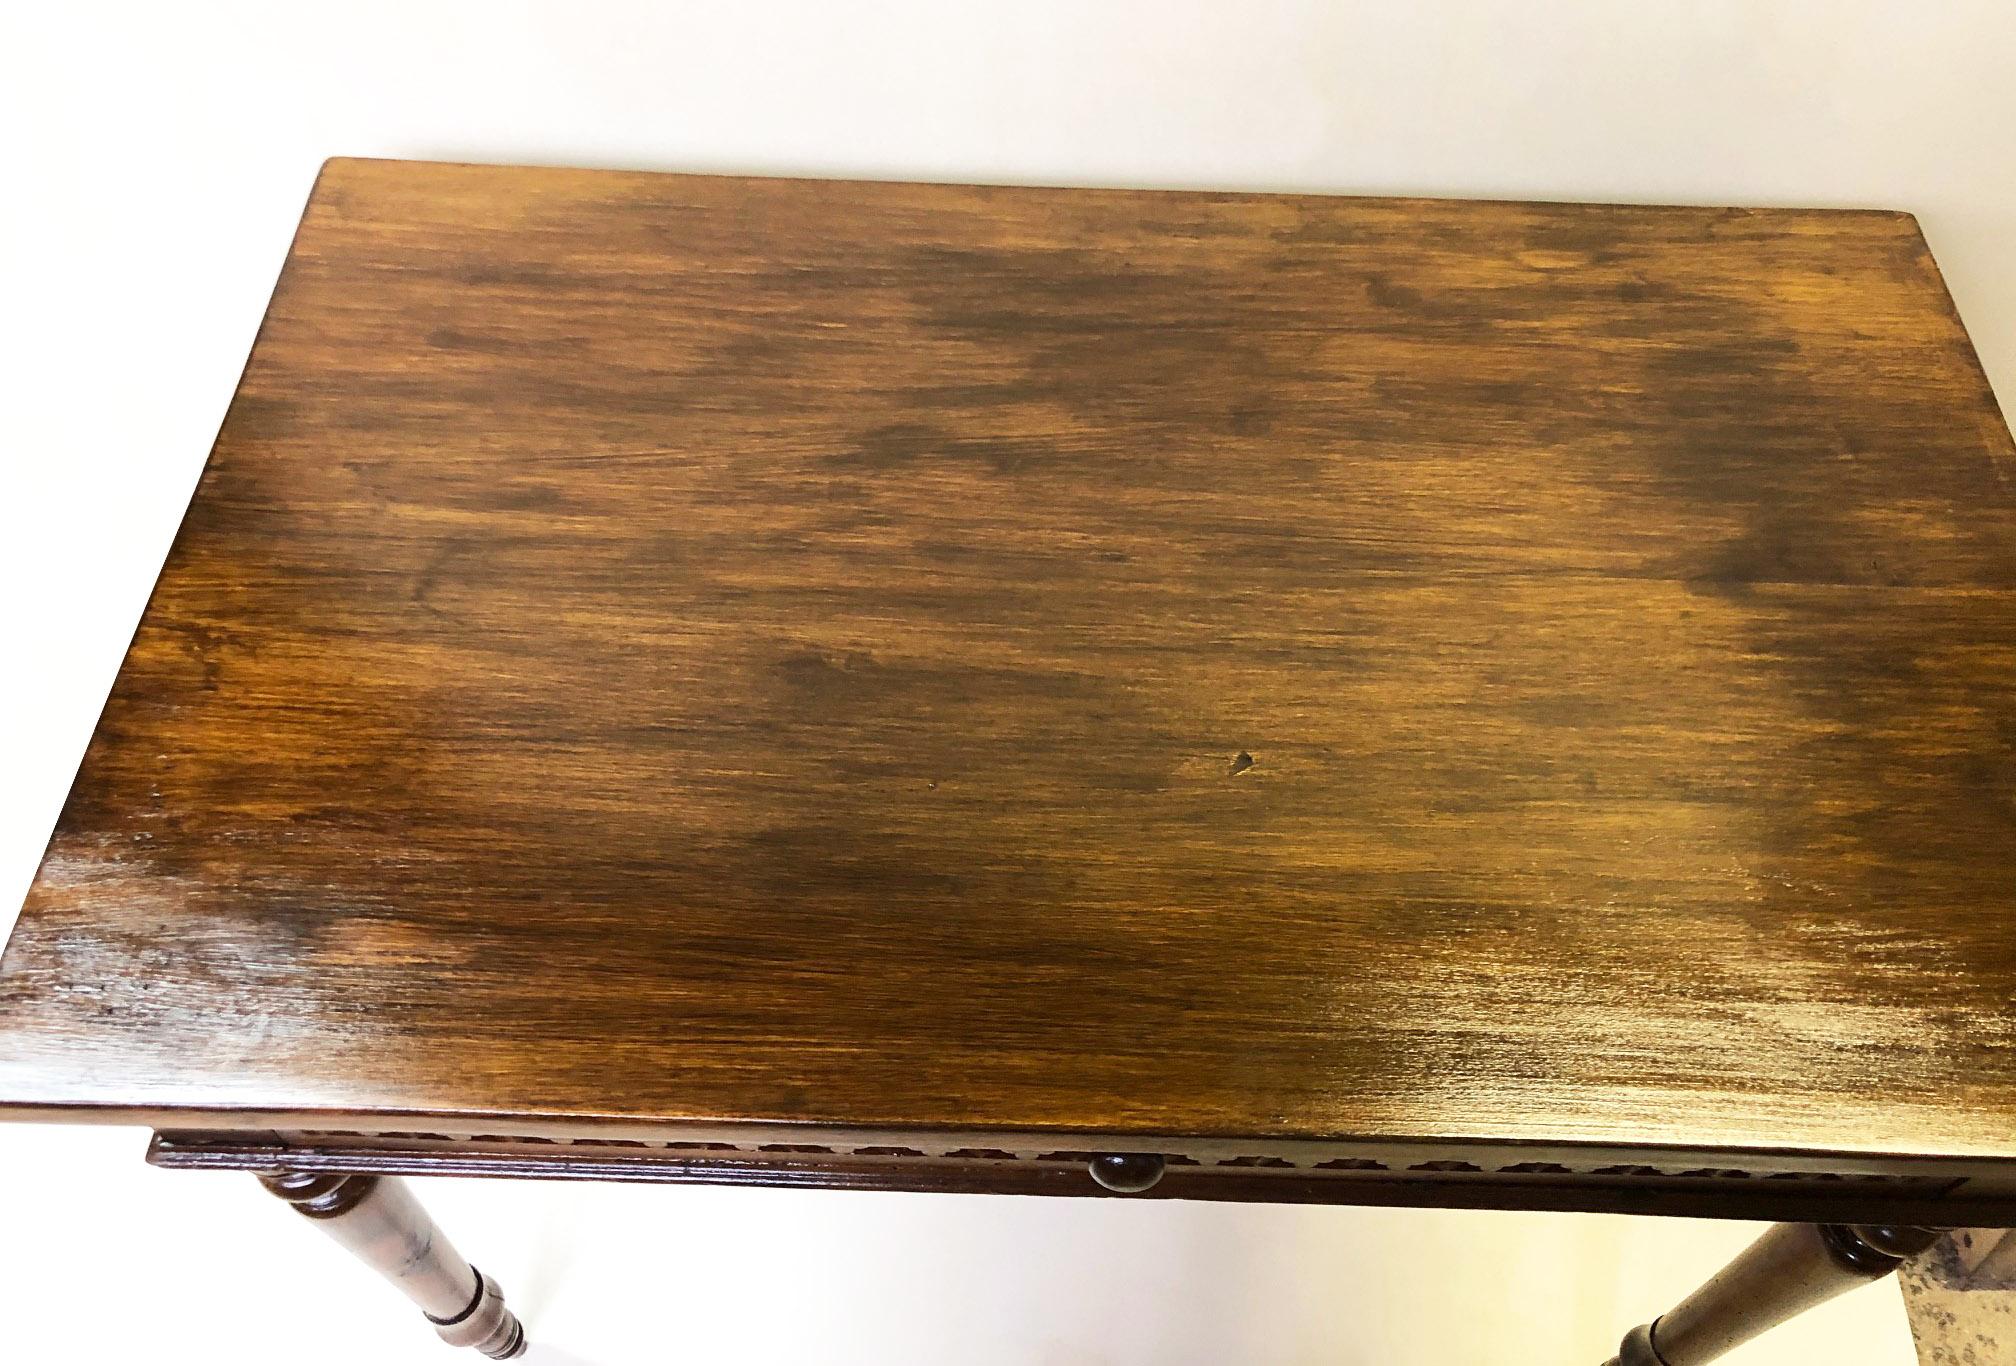 Late 19th Century Original Italian Desk Table in Walnut with Perimeter Carvings from 1880